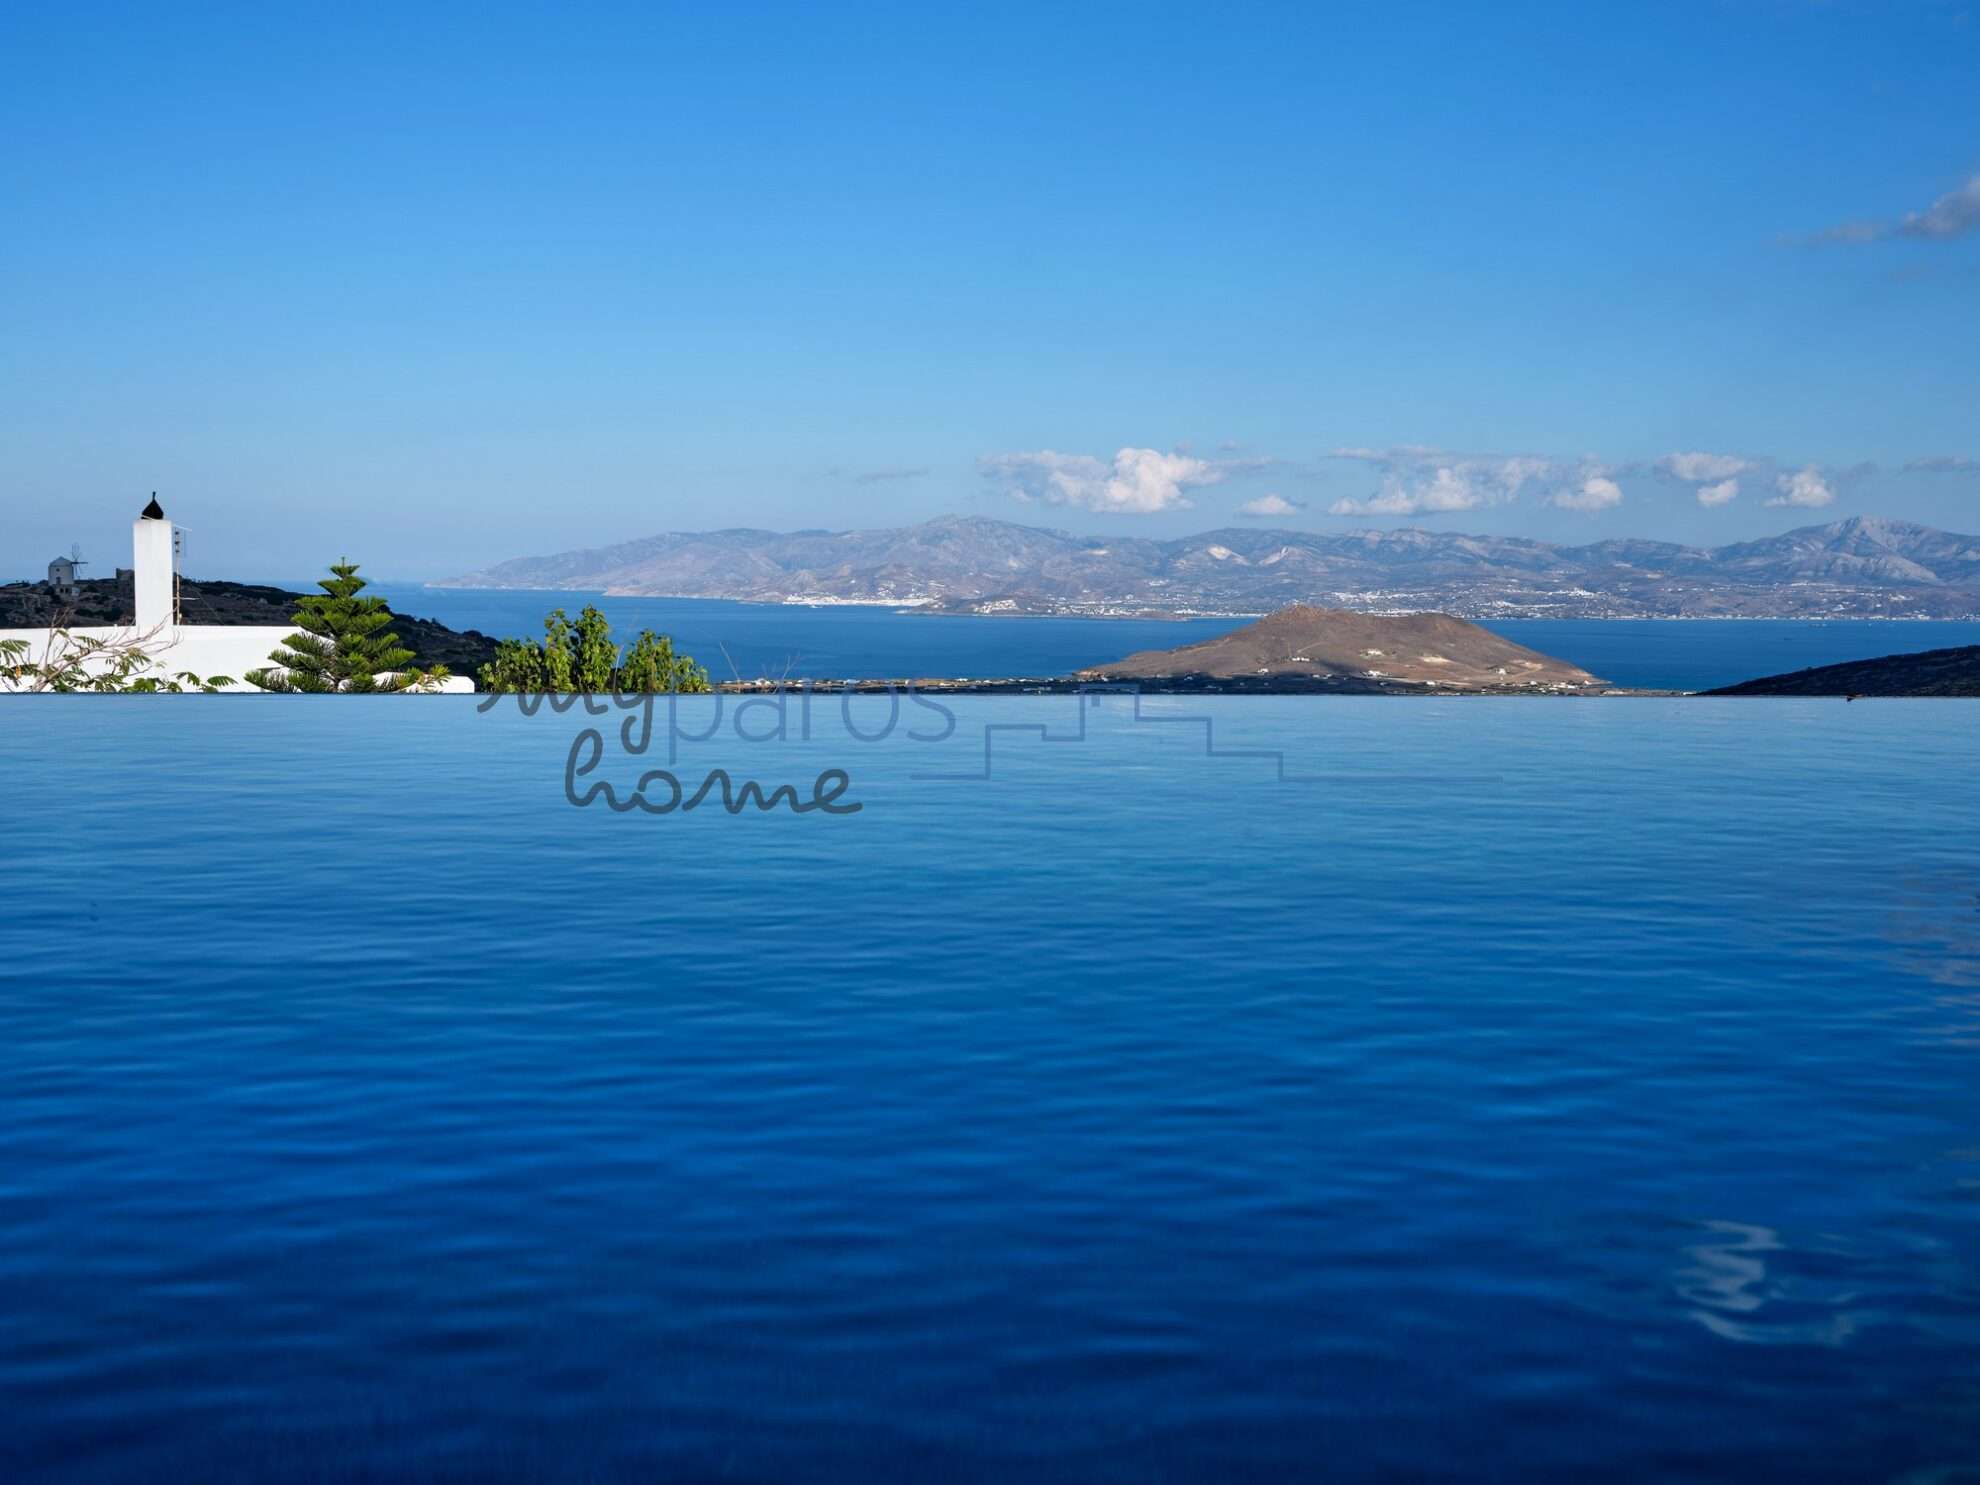 Greece Sotheby's Int. Realty - Paros - Catrice24